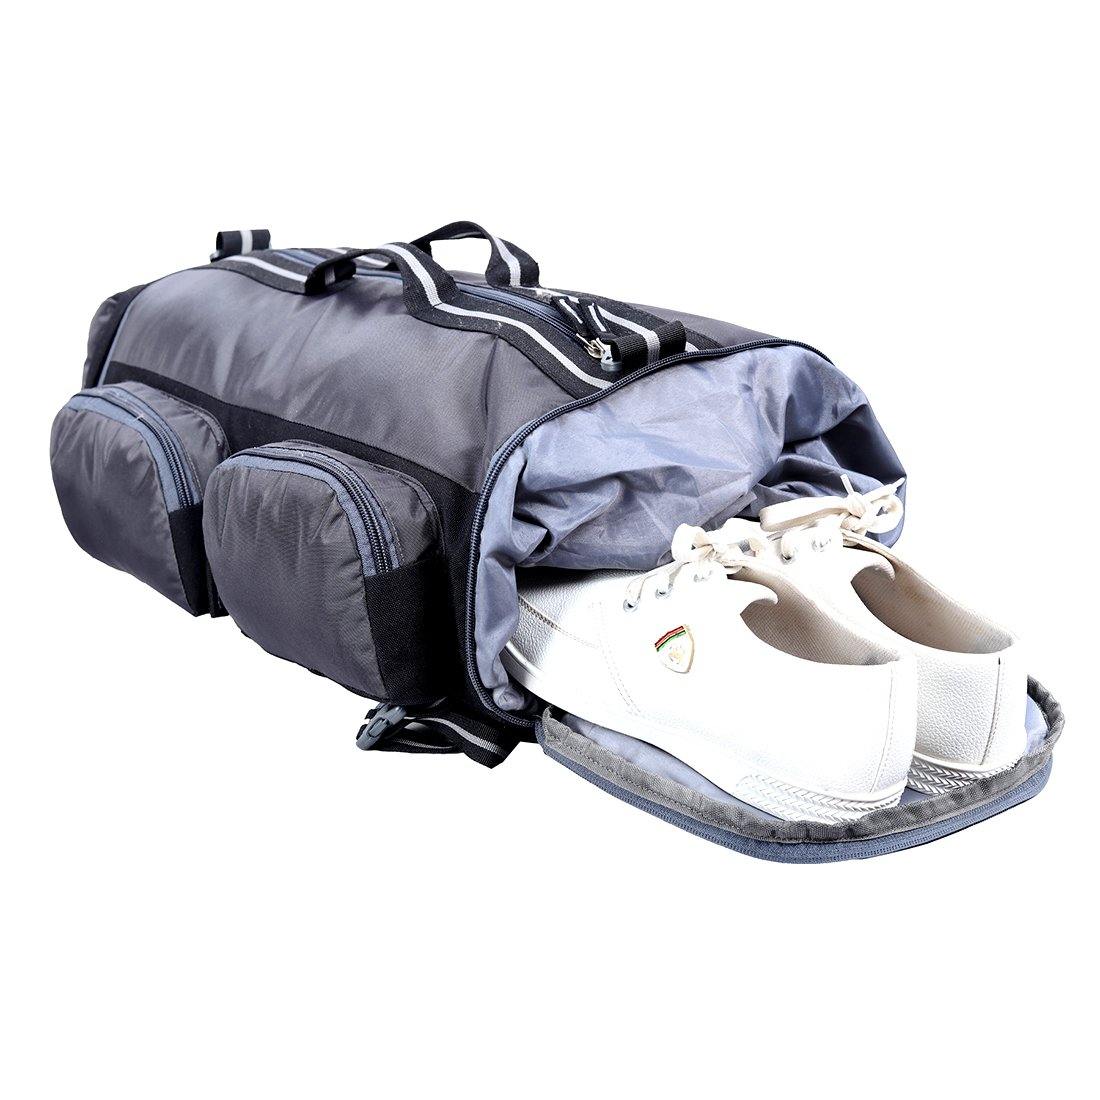 Leather World Black & Grey Casual  Rucksack With Shoe Compartment - Leatherworldonline.net